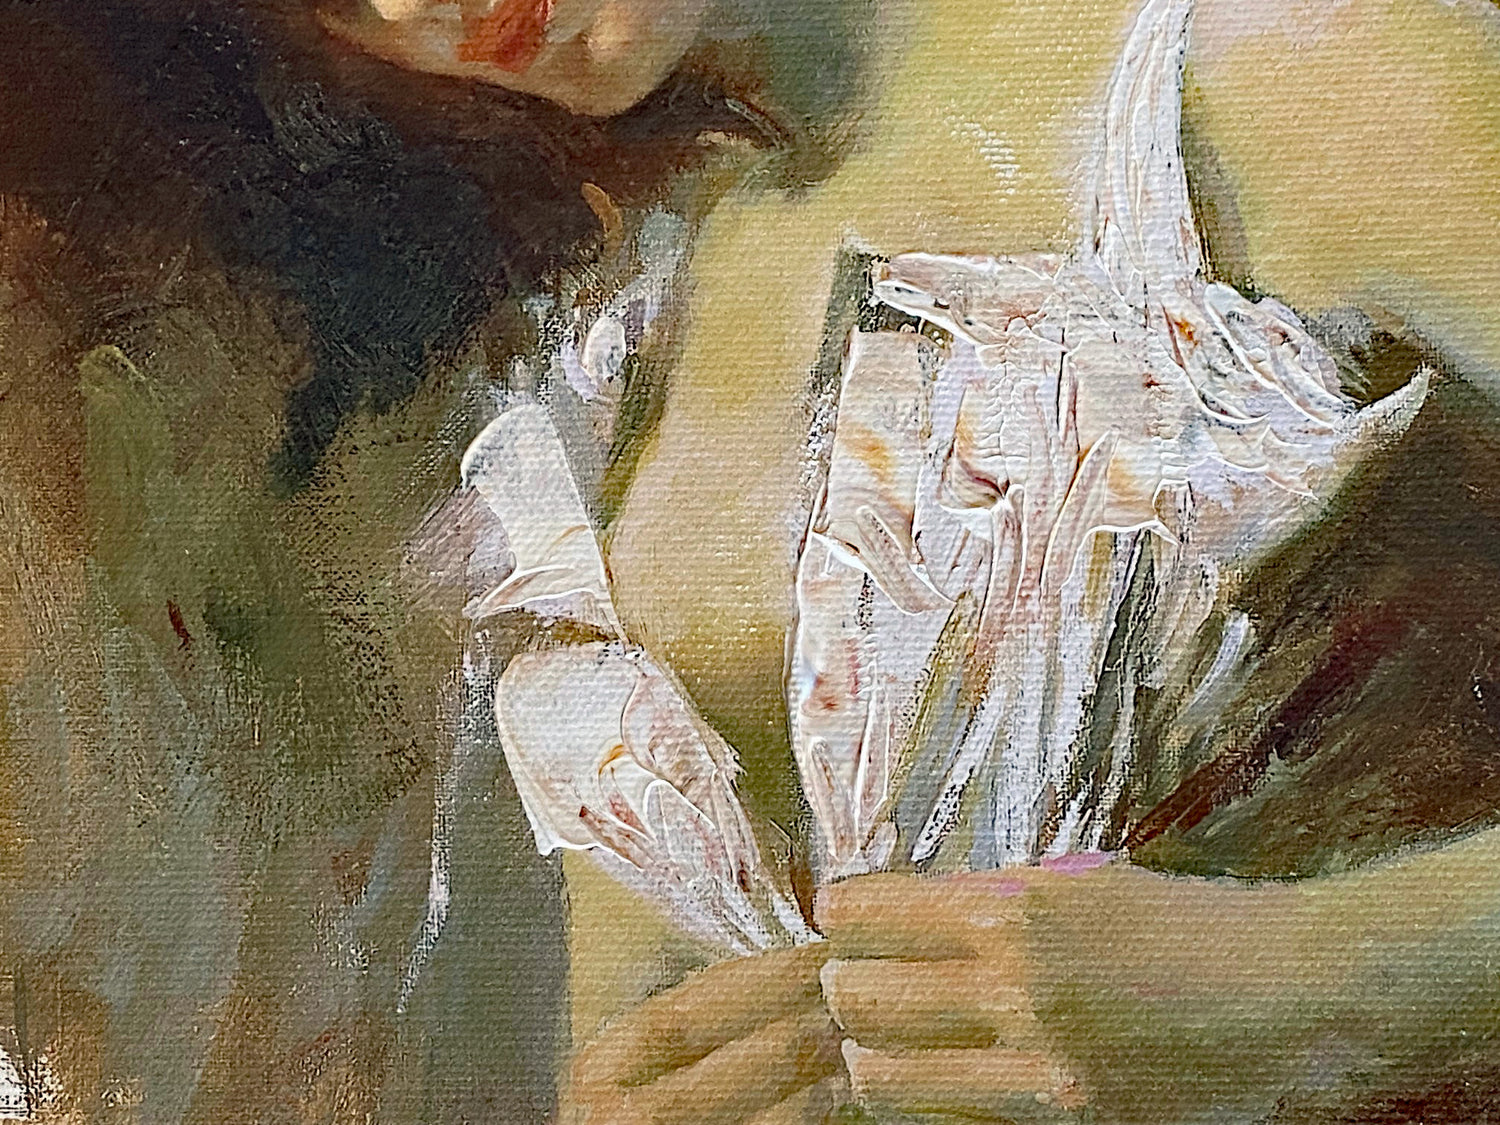 White Camisole Pino Daeni Artist Proof Canvas Giclée Artist Hand Embellished, Signed and Numbered